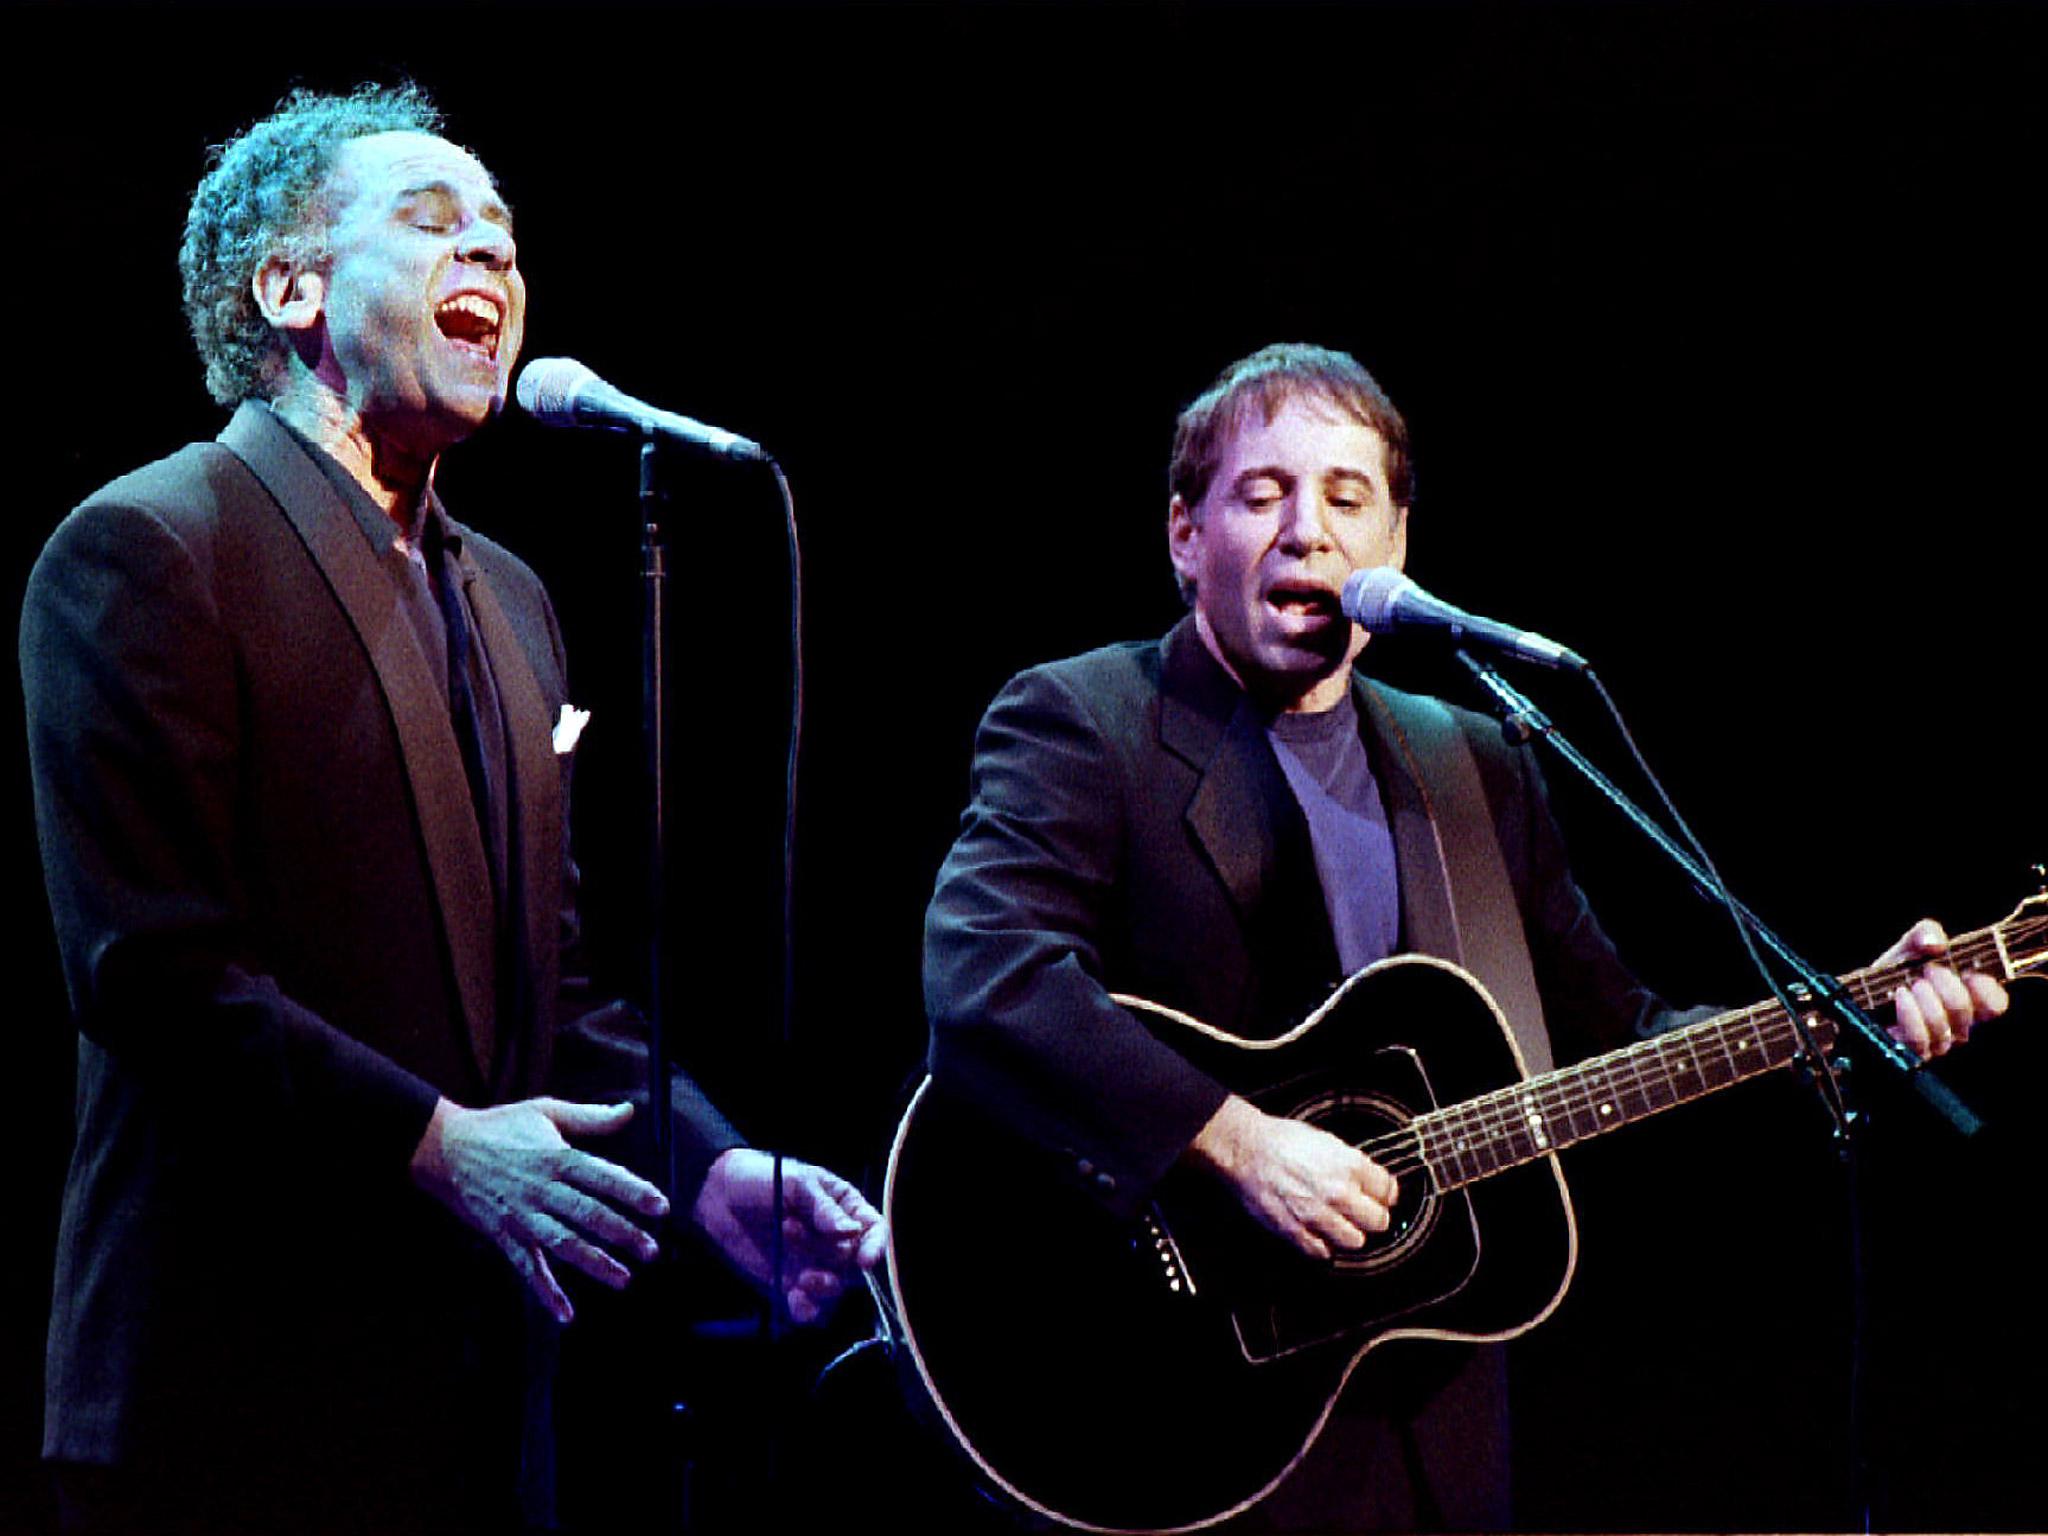 The duo perform ‘The Boxer’ during a benefit concert in Los Angeles, 1993